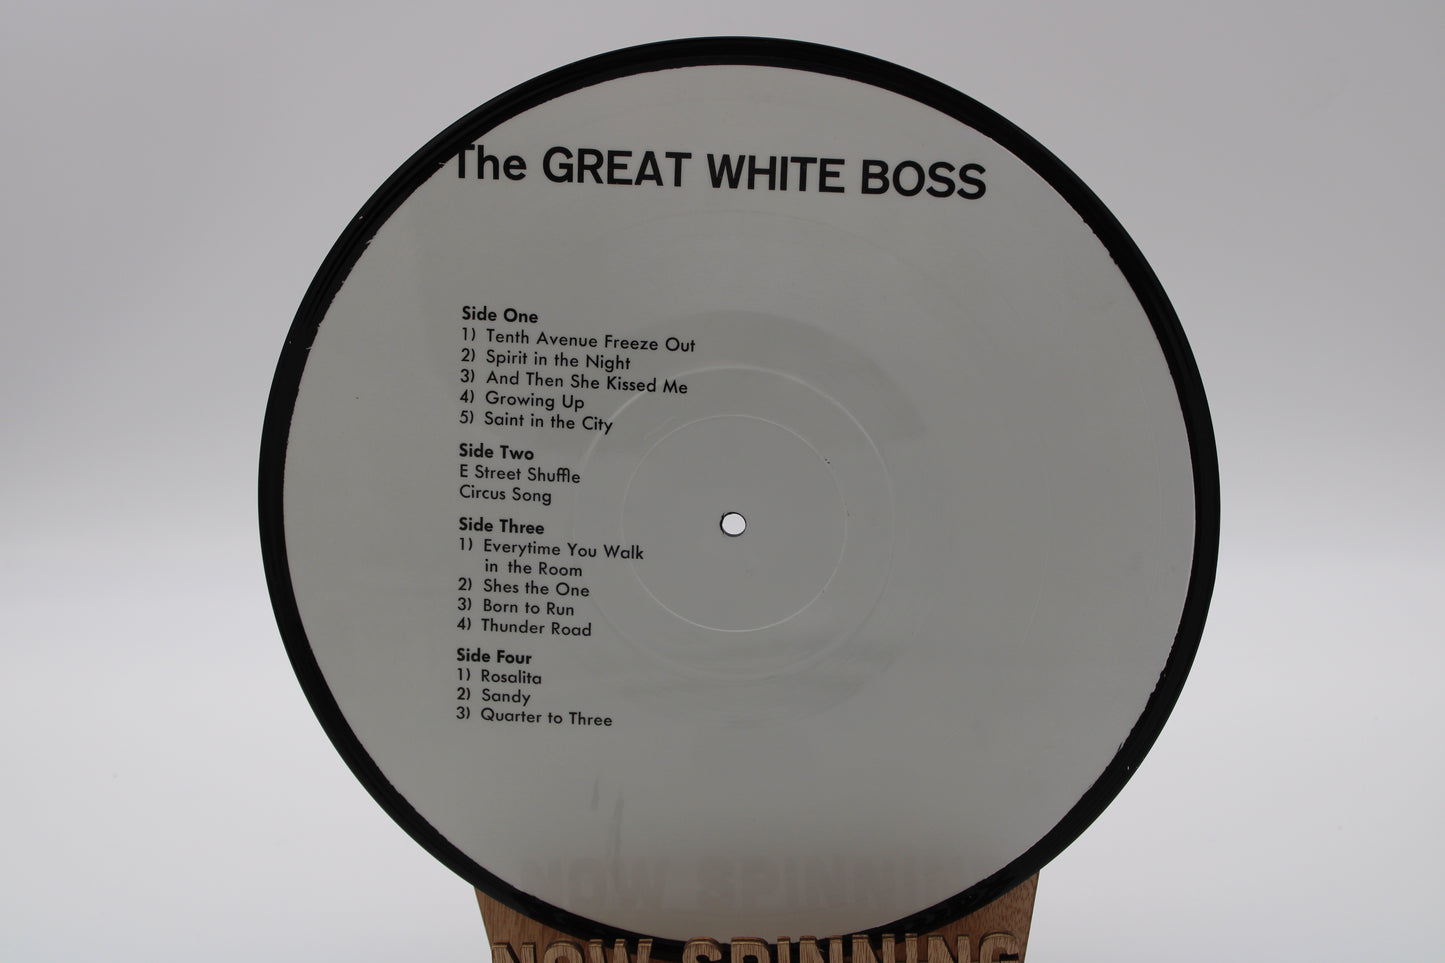 Bruce Springsteen & The E Street Band - The Great White Boss - Picture Vinyl LP BLV